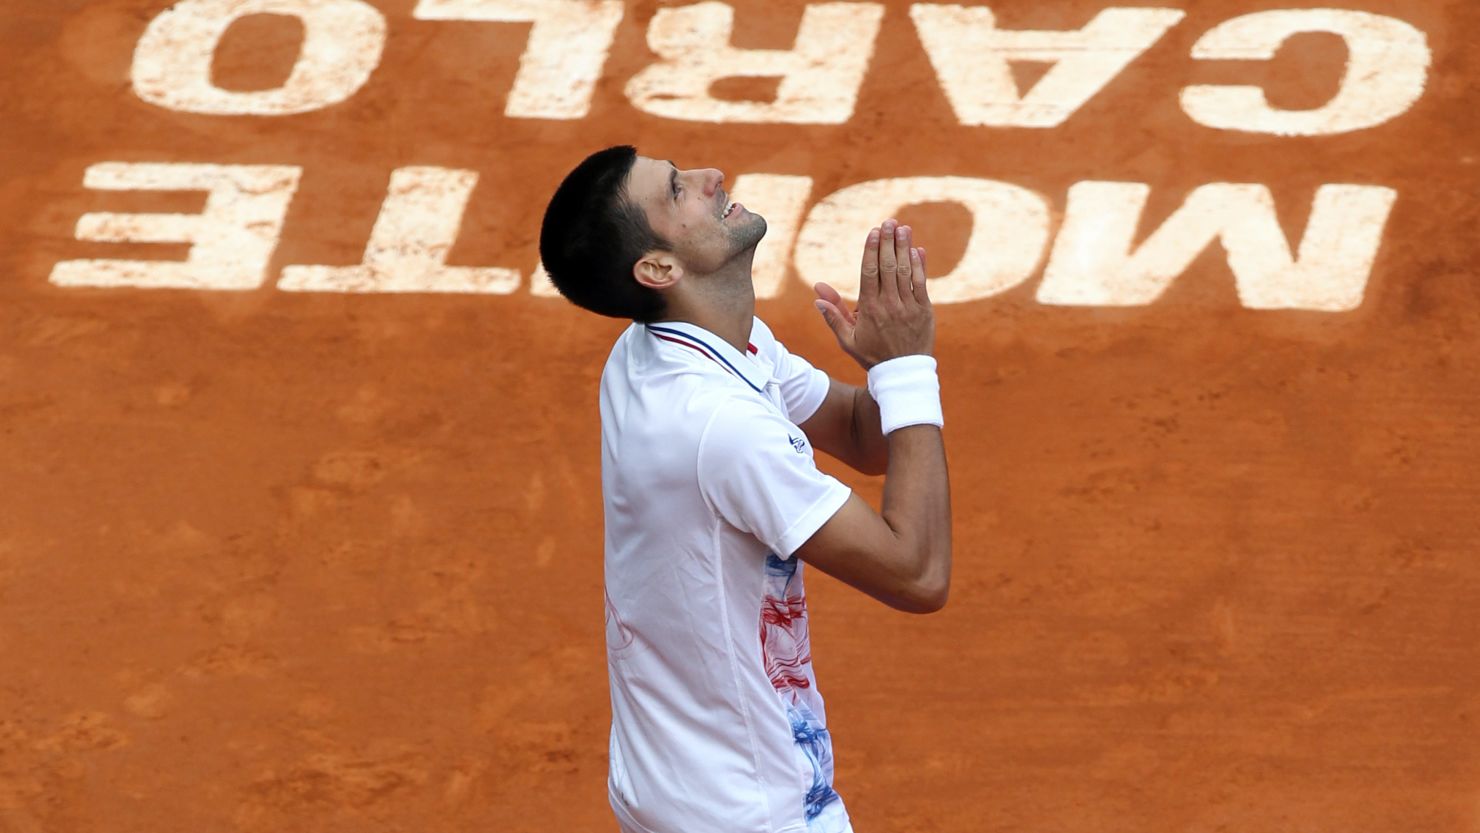 Novak Djokovic looks to the skies after his win in Monte Carlo, just hours after learning of his grandfather's death